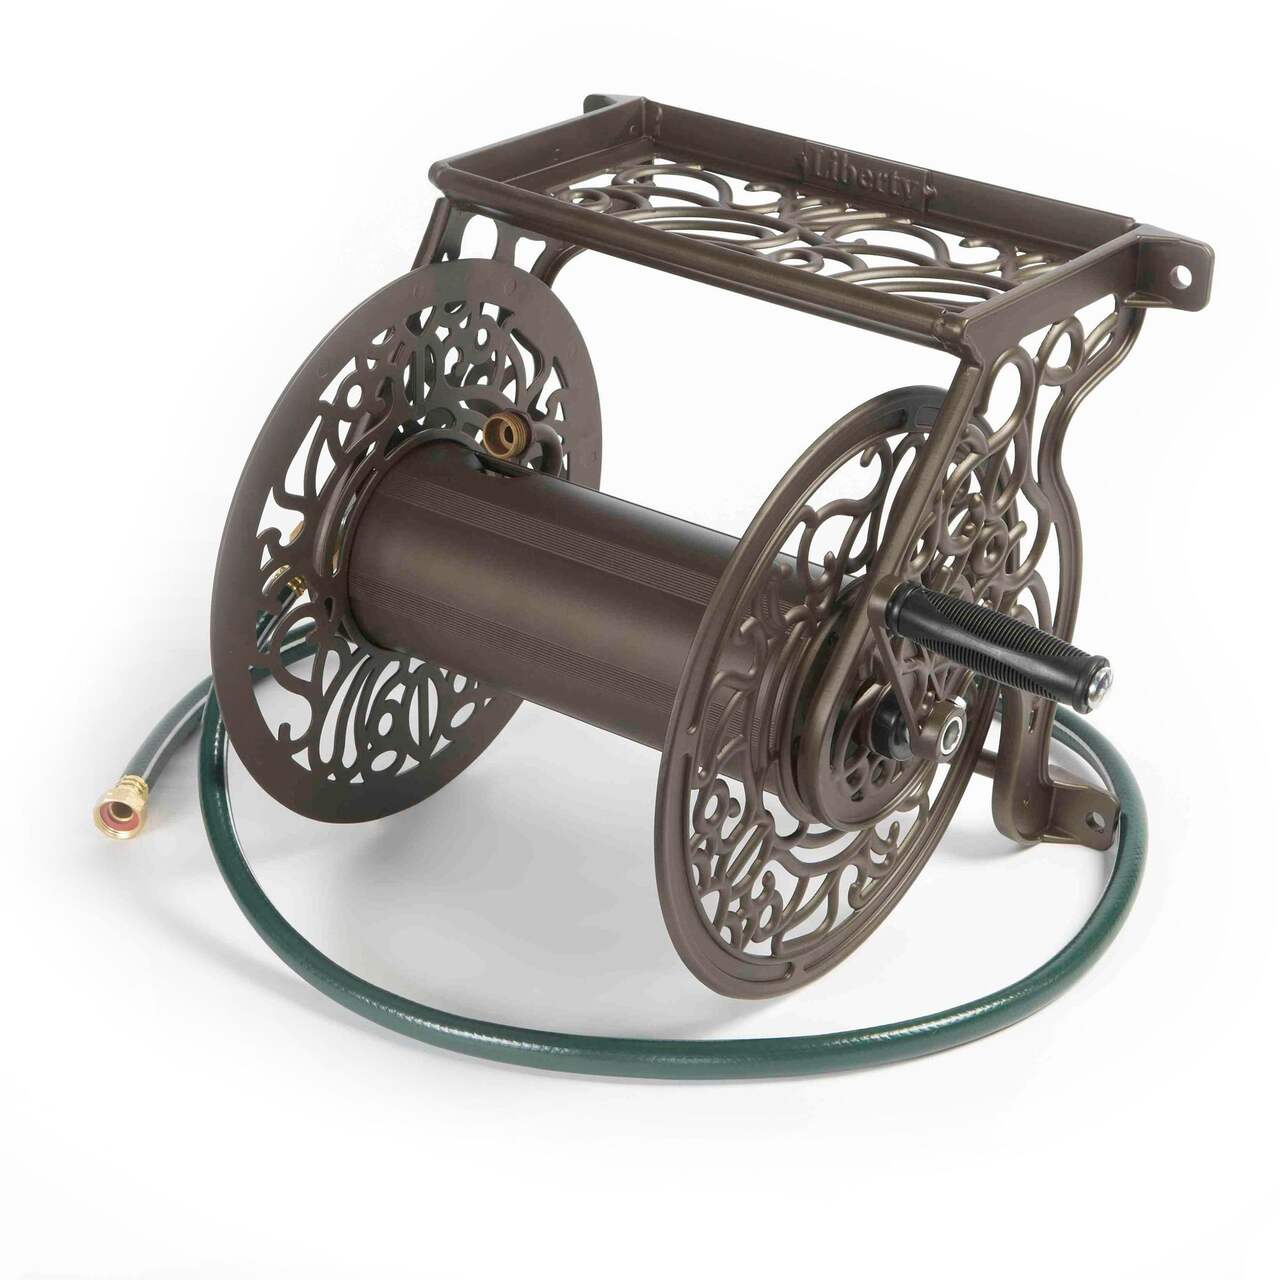 https://media-www.canadiantire.ca/product/seasonal-gardening/outdoor-tools/watering/0593467/liberty-decorative-metal-wall-mounted-hose-reel-b4efaa56-265c-4508-9955-bc1c8c8117a2-jpgrendition.jpg?imdensity=1&imwidth=1244&impolicy=mZoom